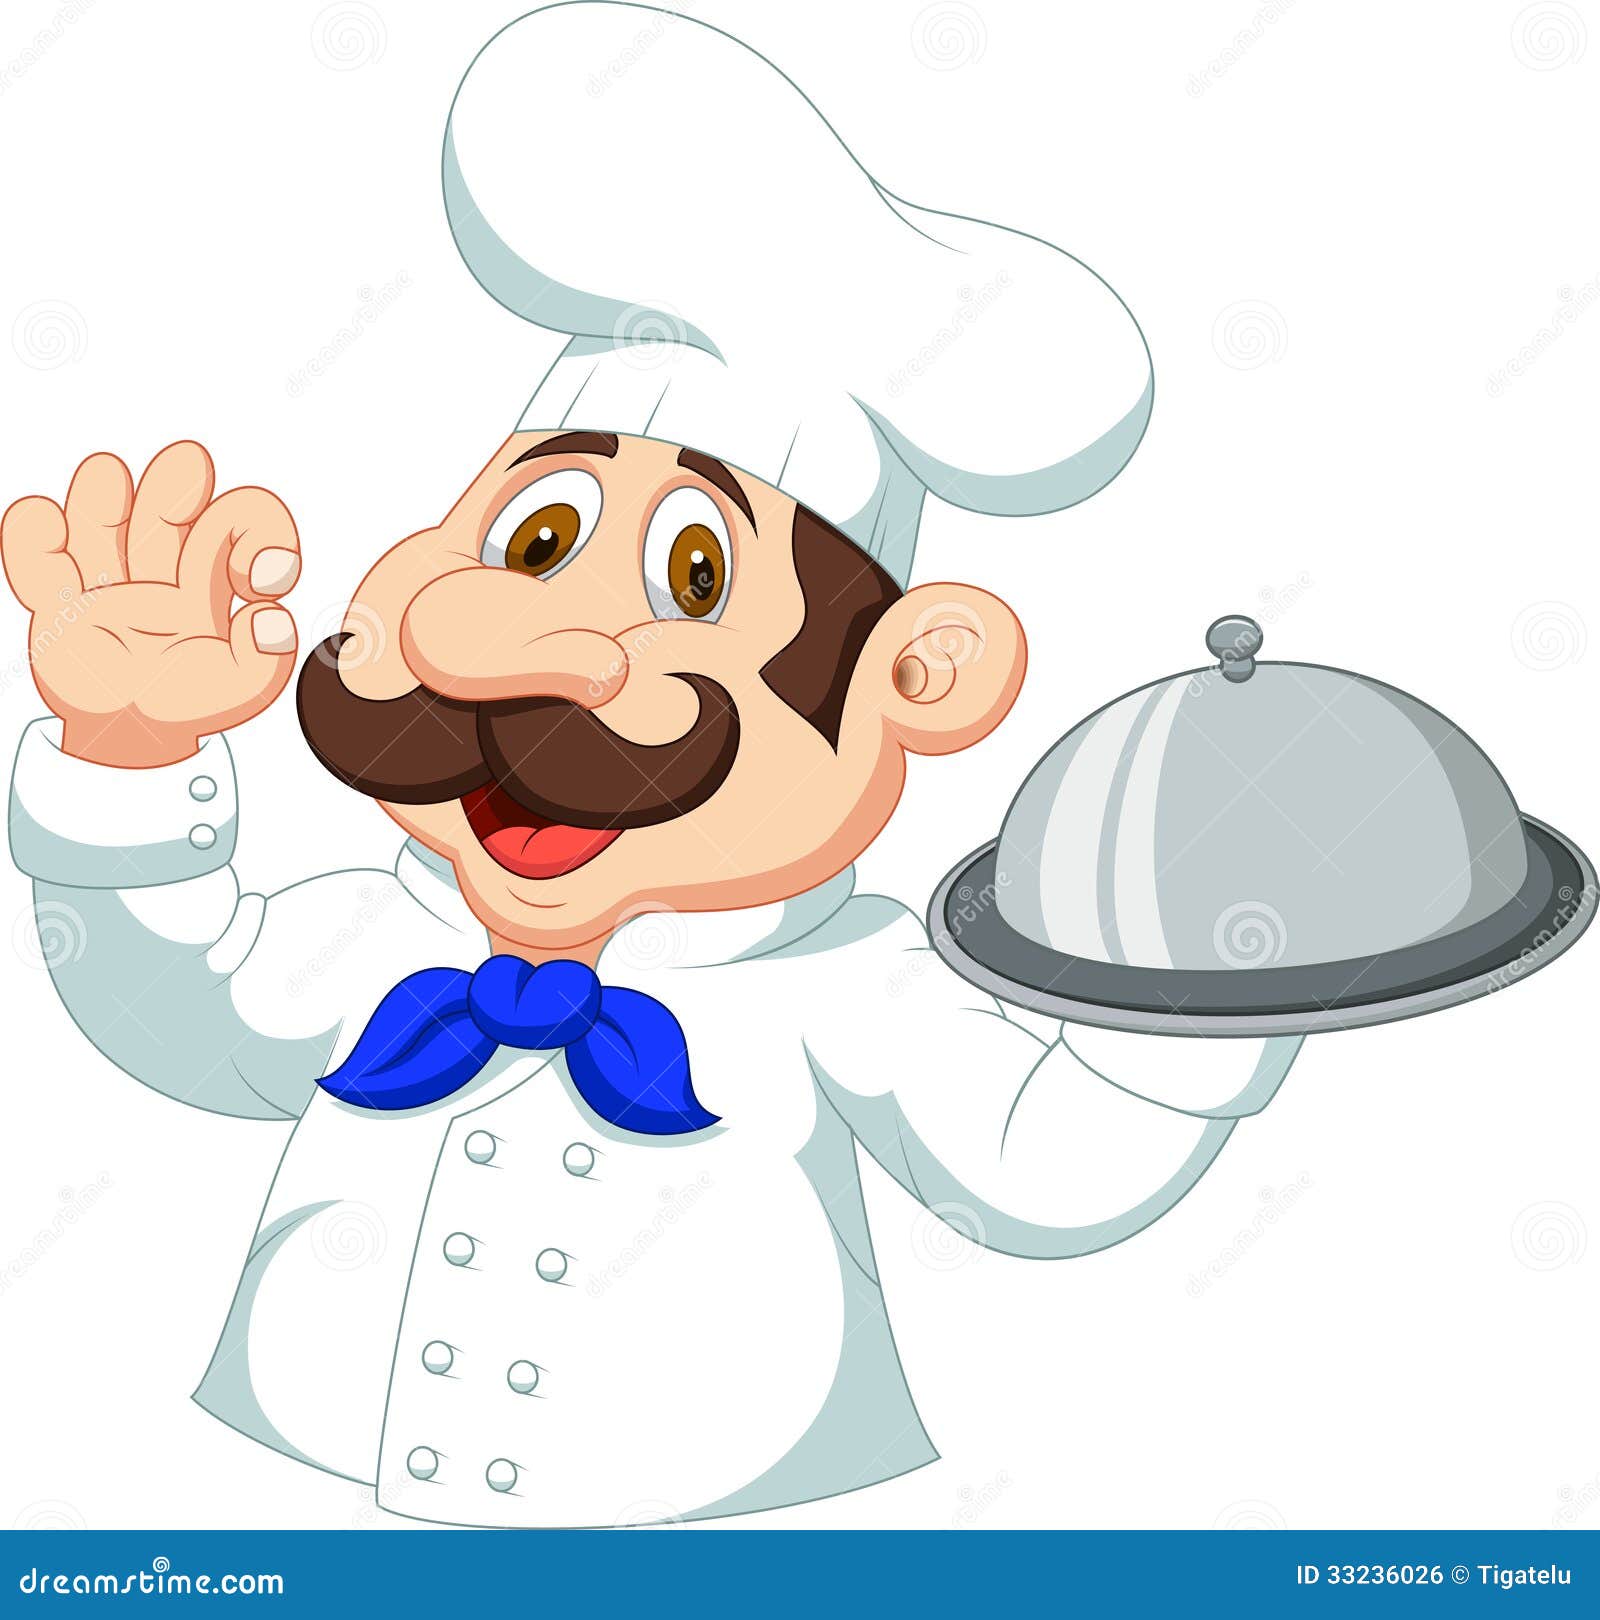 Chef Cartoon With Ok Sign Royalty Free Stock Image - Image ...